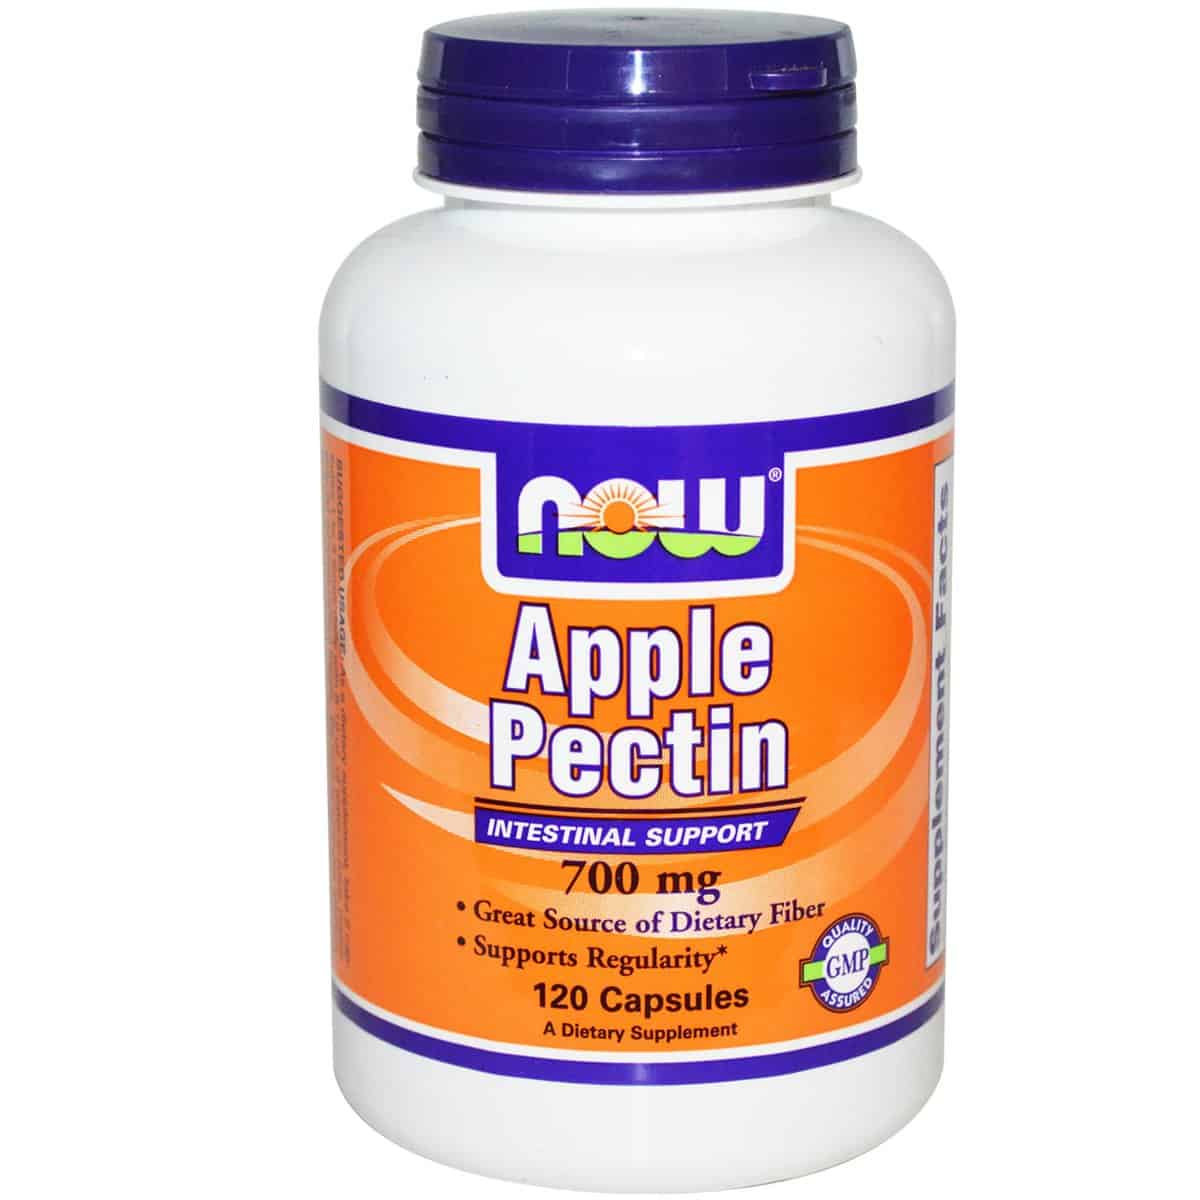 Apple Pectin is a source of water soluble fiber which has a gel-forming effect when mixed with water. As a dietary fiber, Apple Pectin may be helpful in supporting good intestinal health. a Health and Beauty from